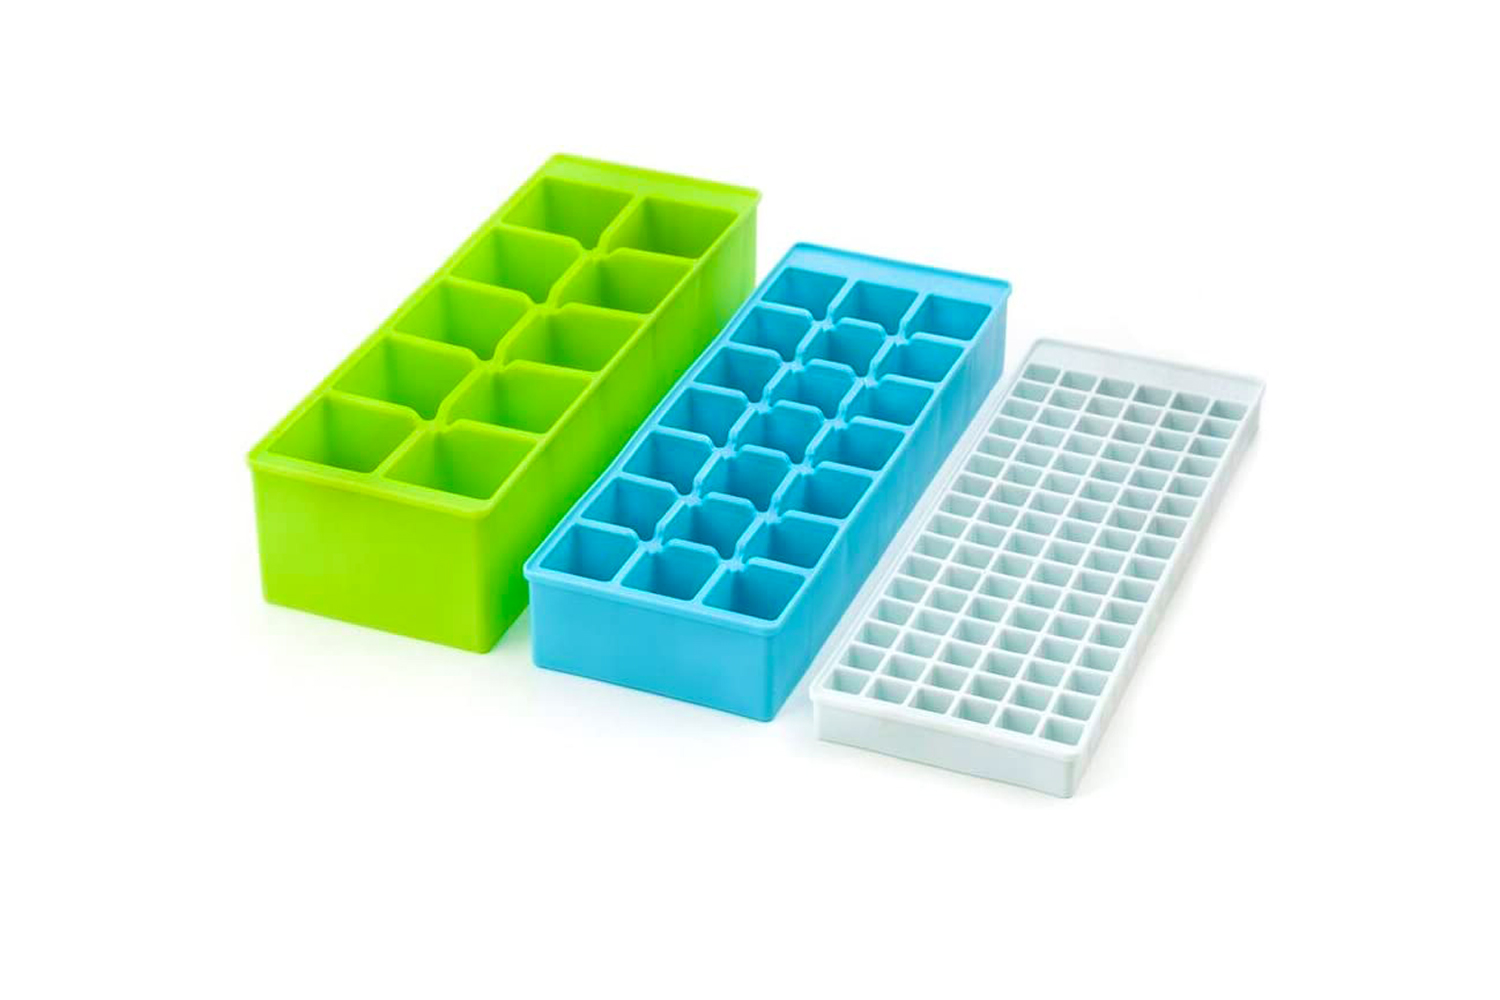 https://www.themanual.com/wp-content/uploads/sites/9/2021/02/kikkerland-stackable-ice-cube-tray-mold.jpg?fit=800%2C533&p=1